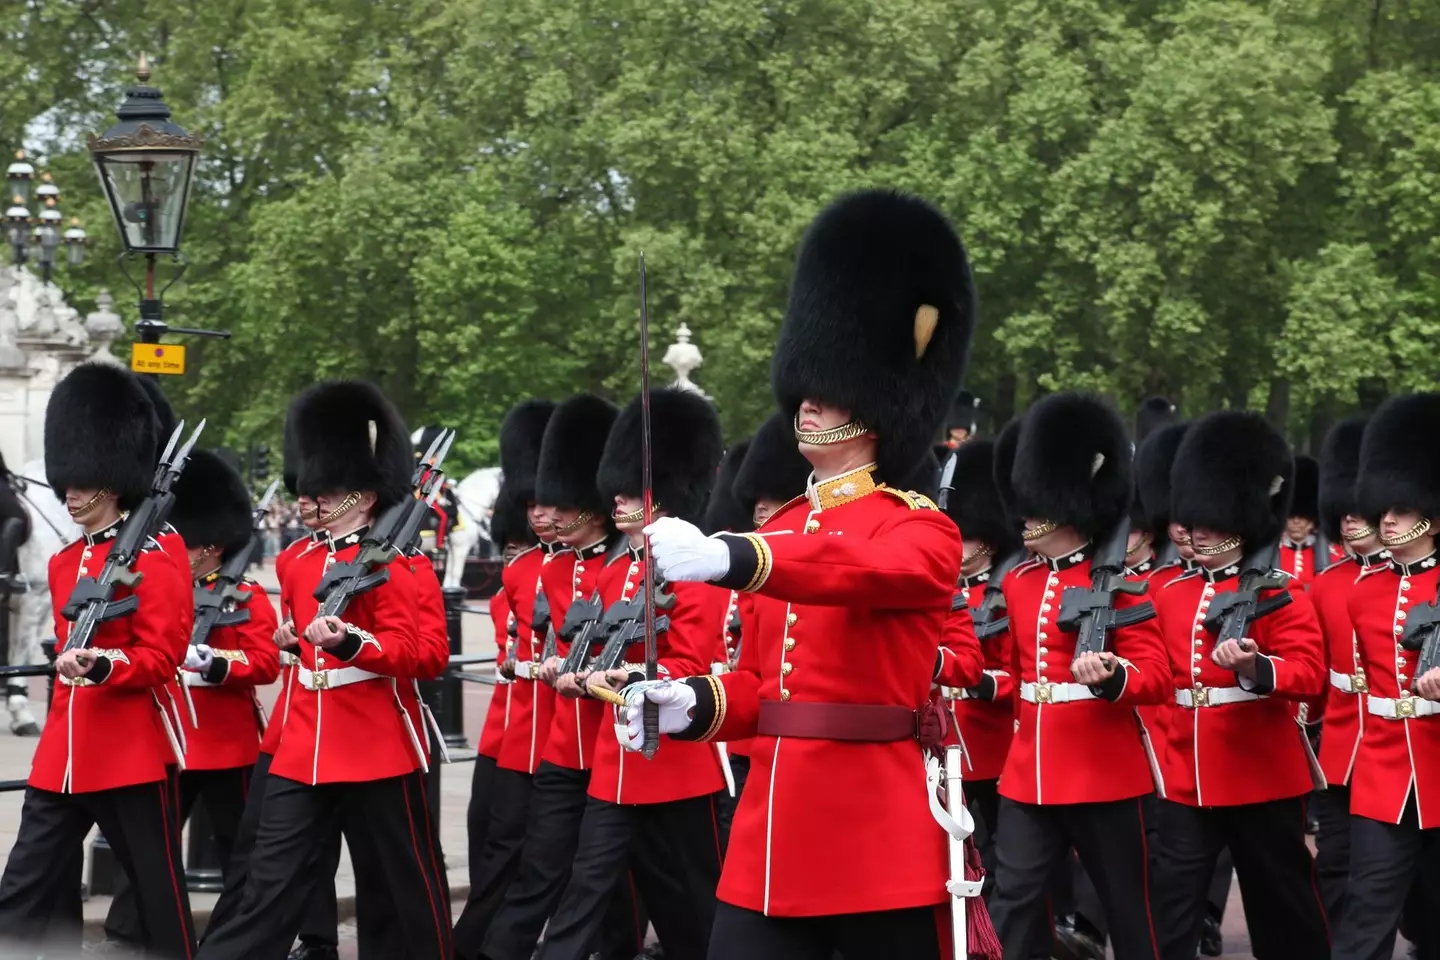 The Trooping the Colour takes place on Thursday.